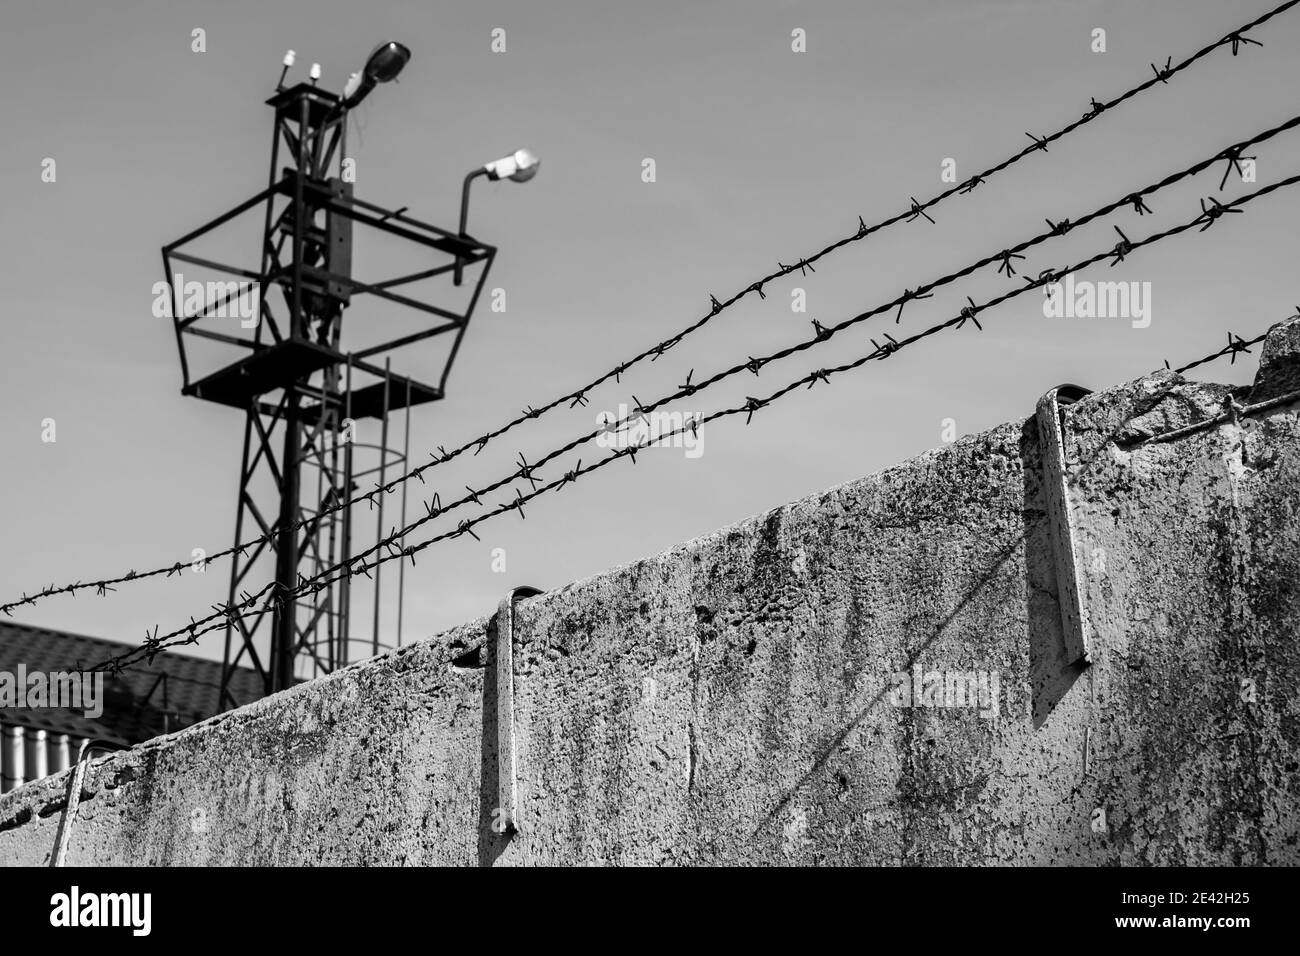 Prison fence with barbed wire, black and white grunge version Stock Photo